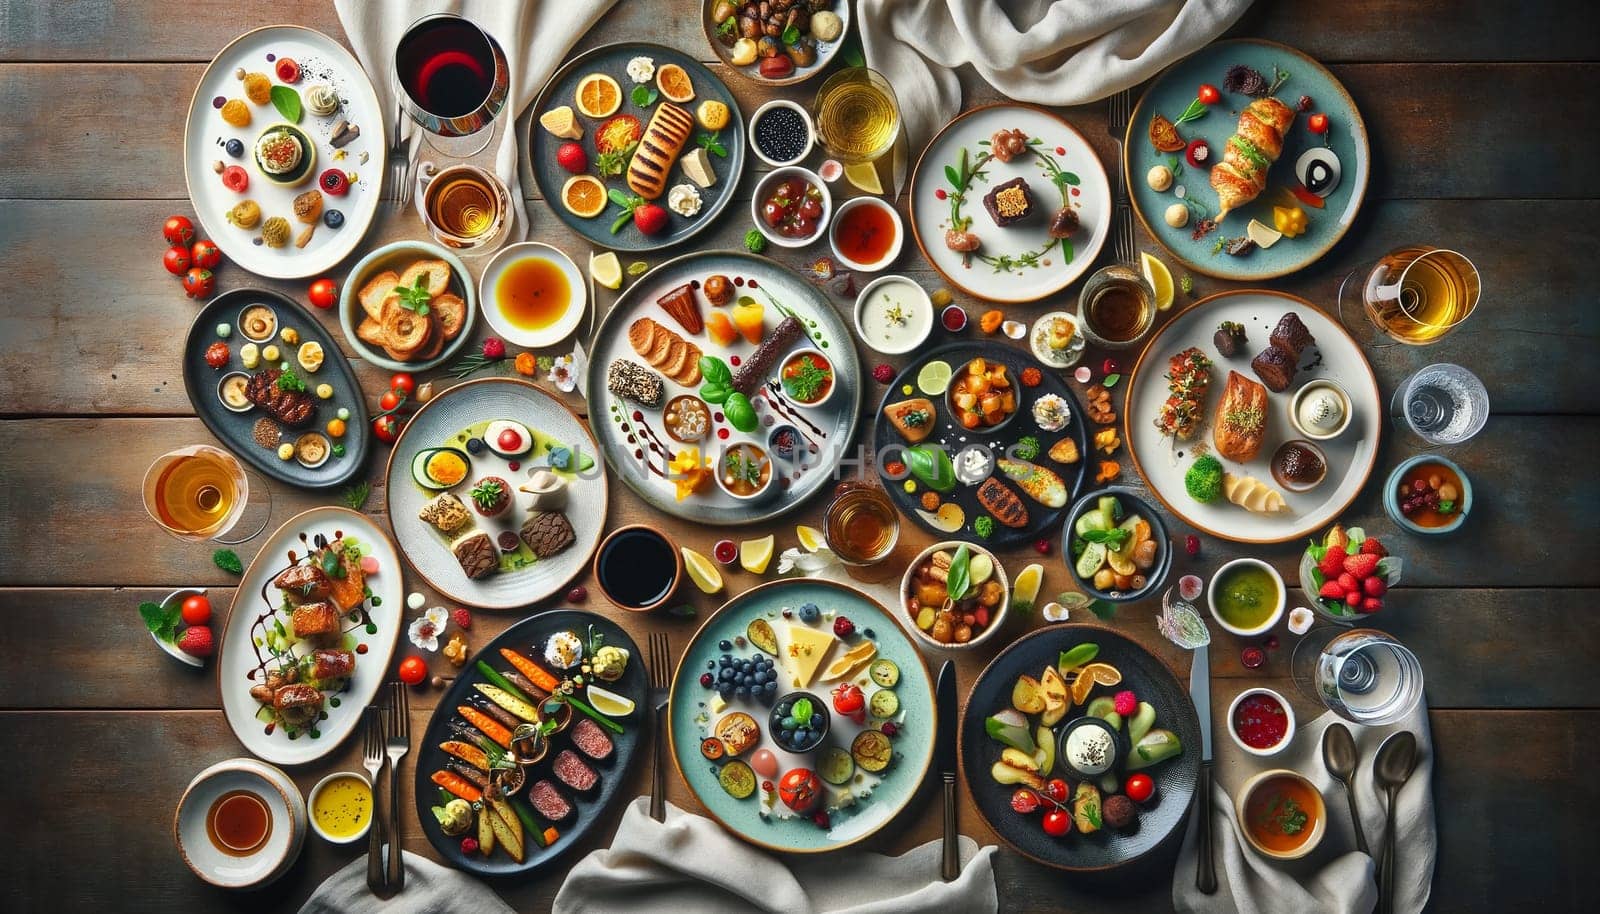 Array of Gourmet Dishes: Appetizers, Main Courses, Desserts, and Beverages by Nadtochiy